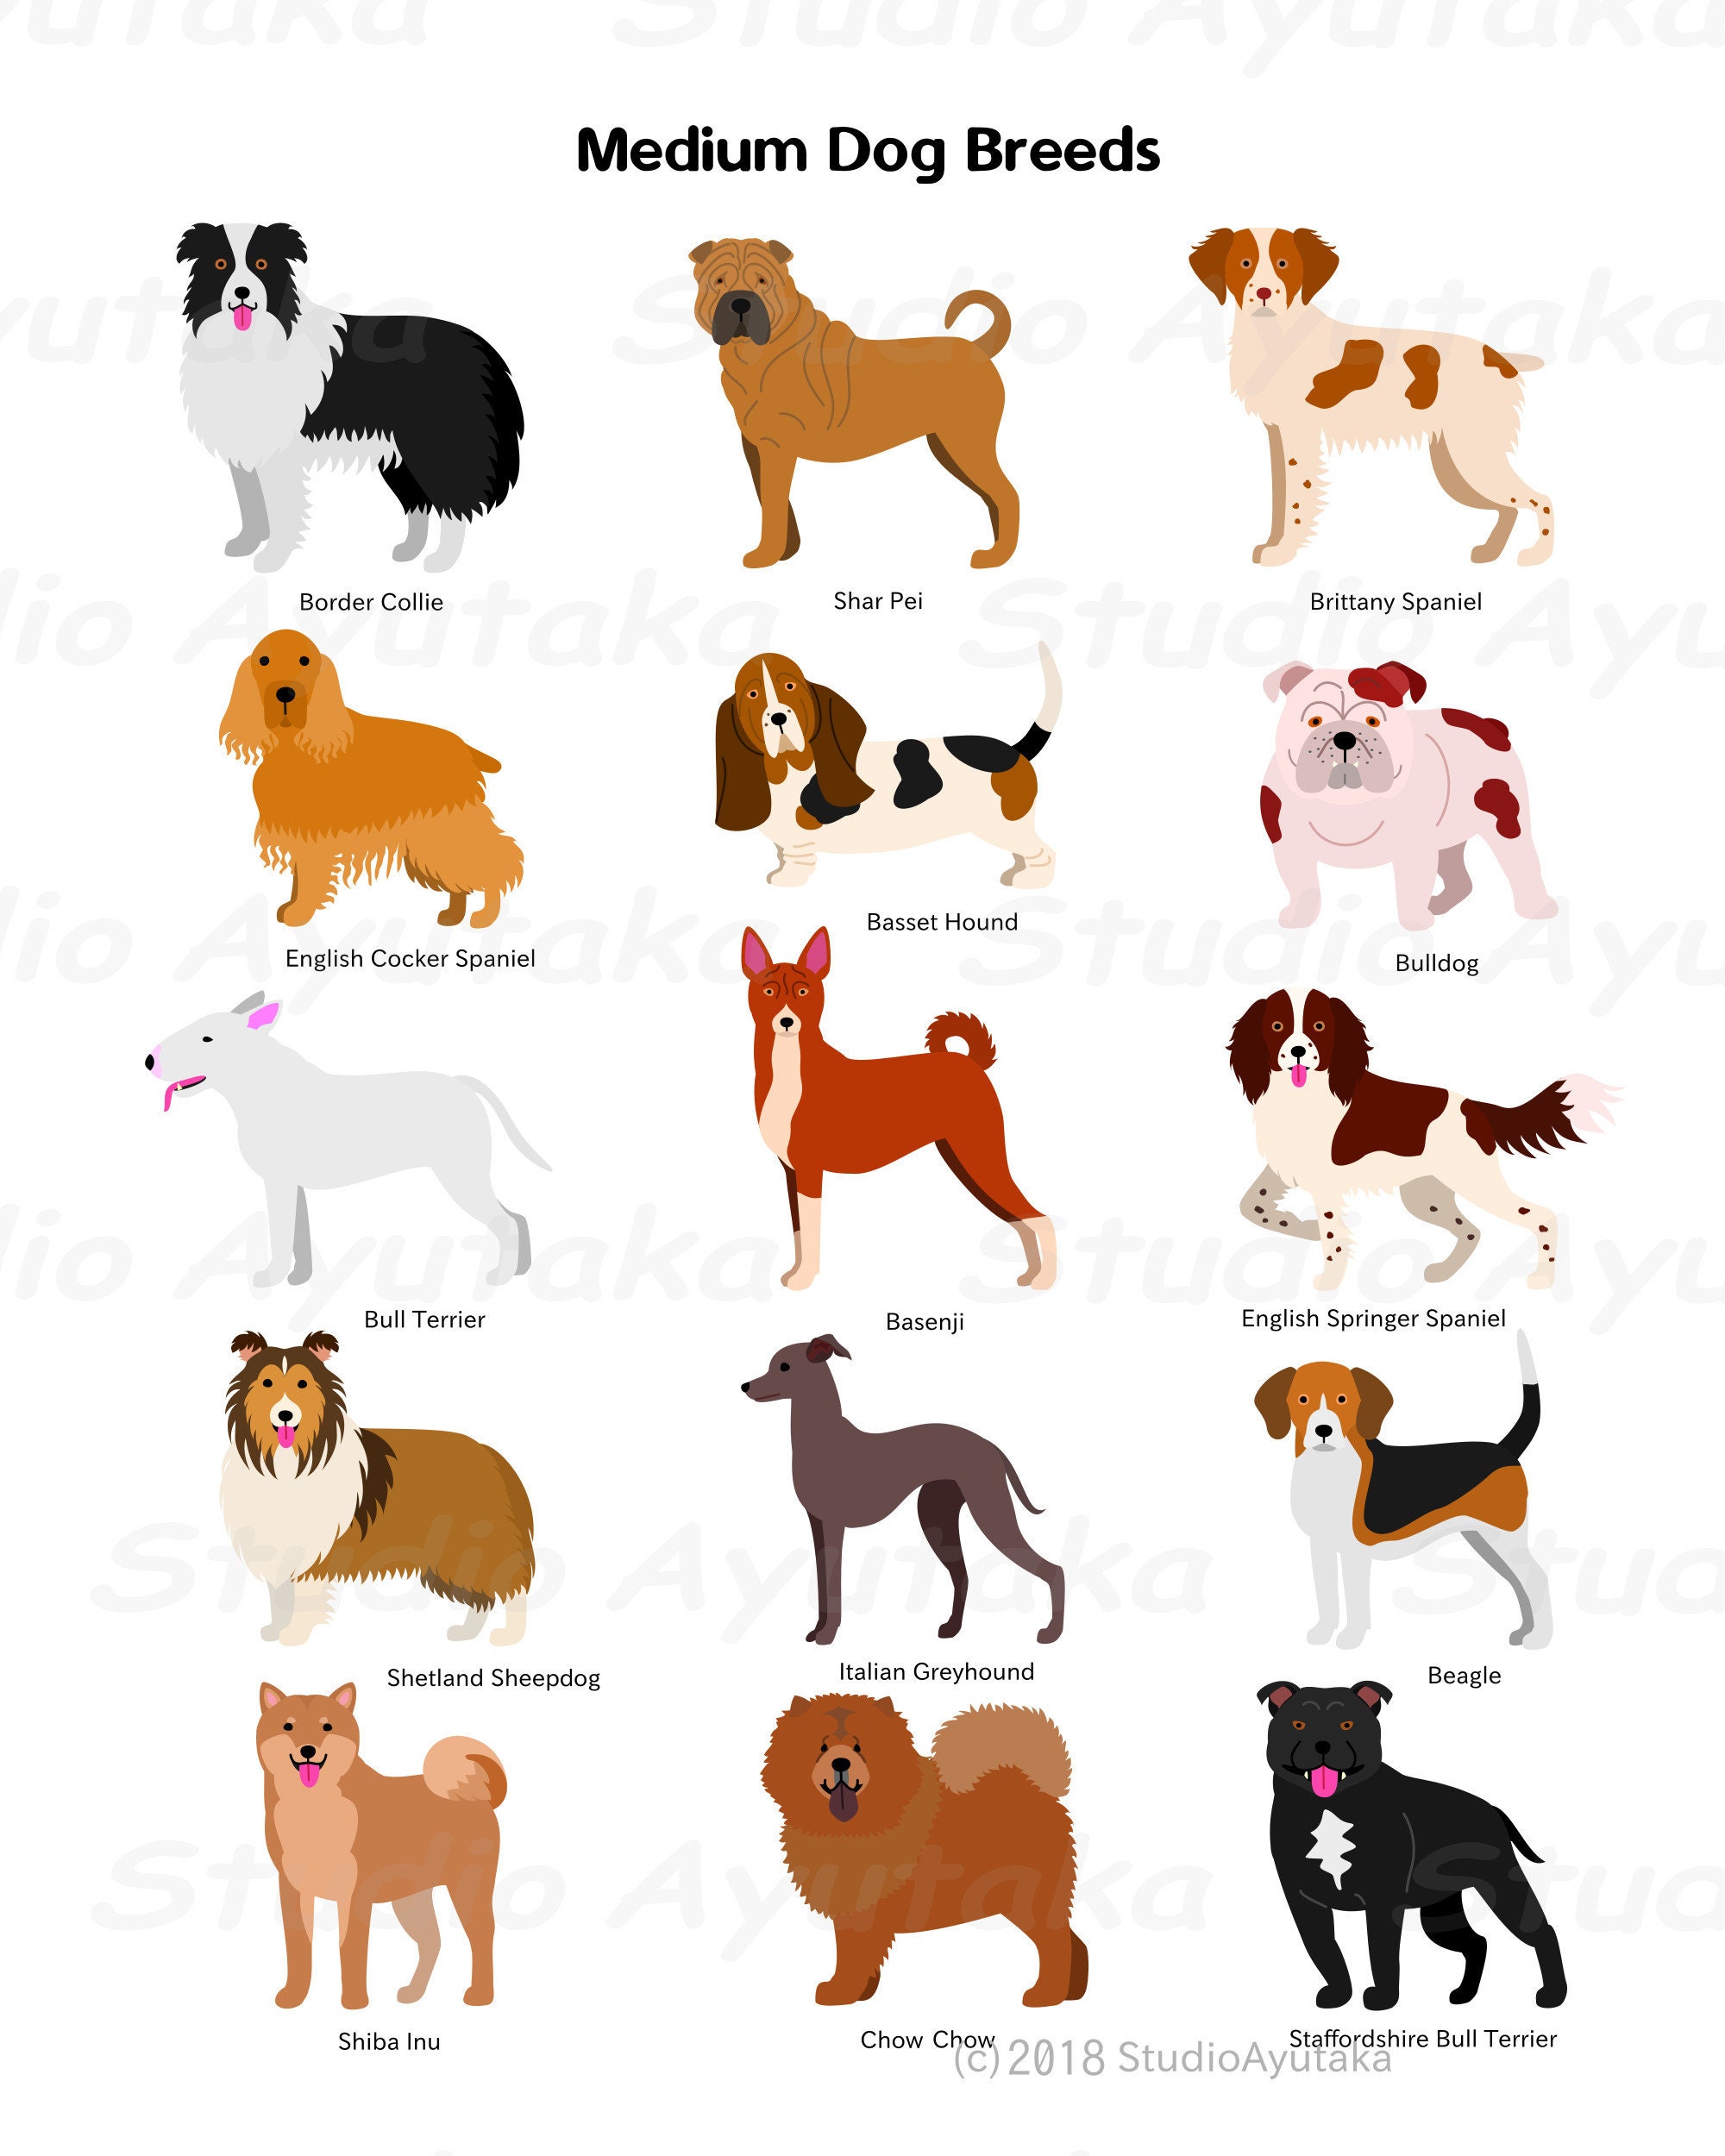 Dog breeds: Find a dog that matches your lifestyle